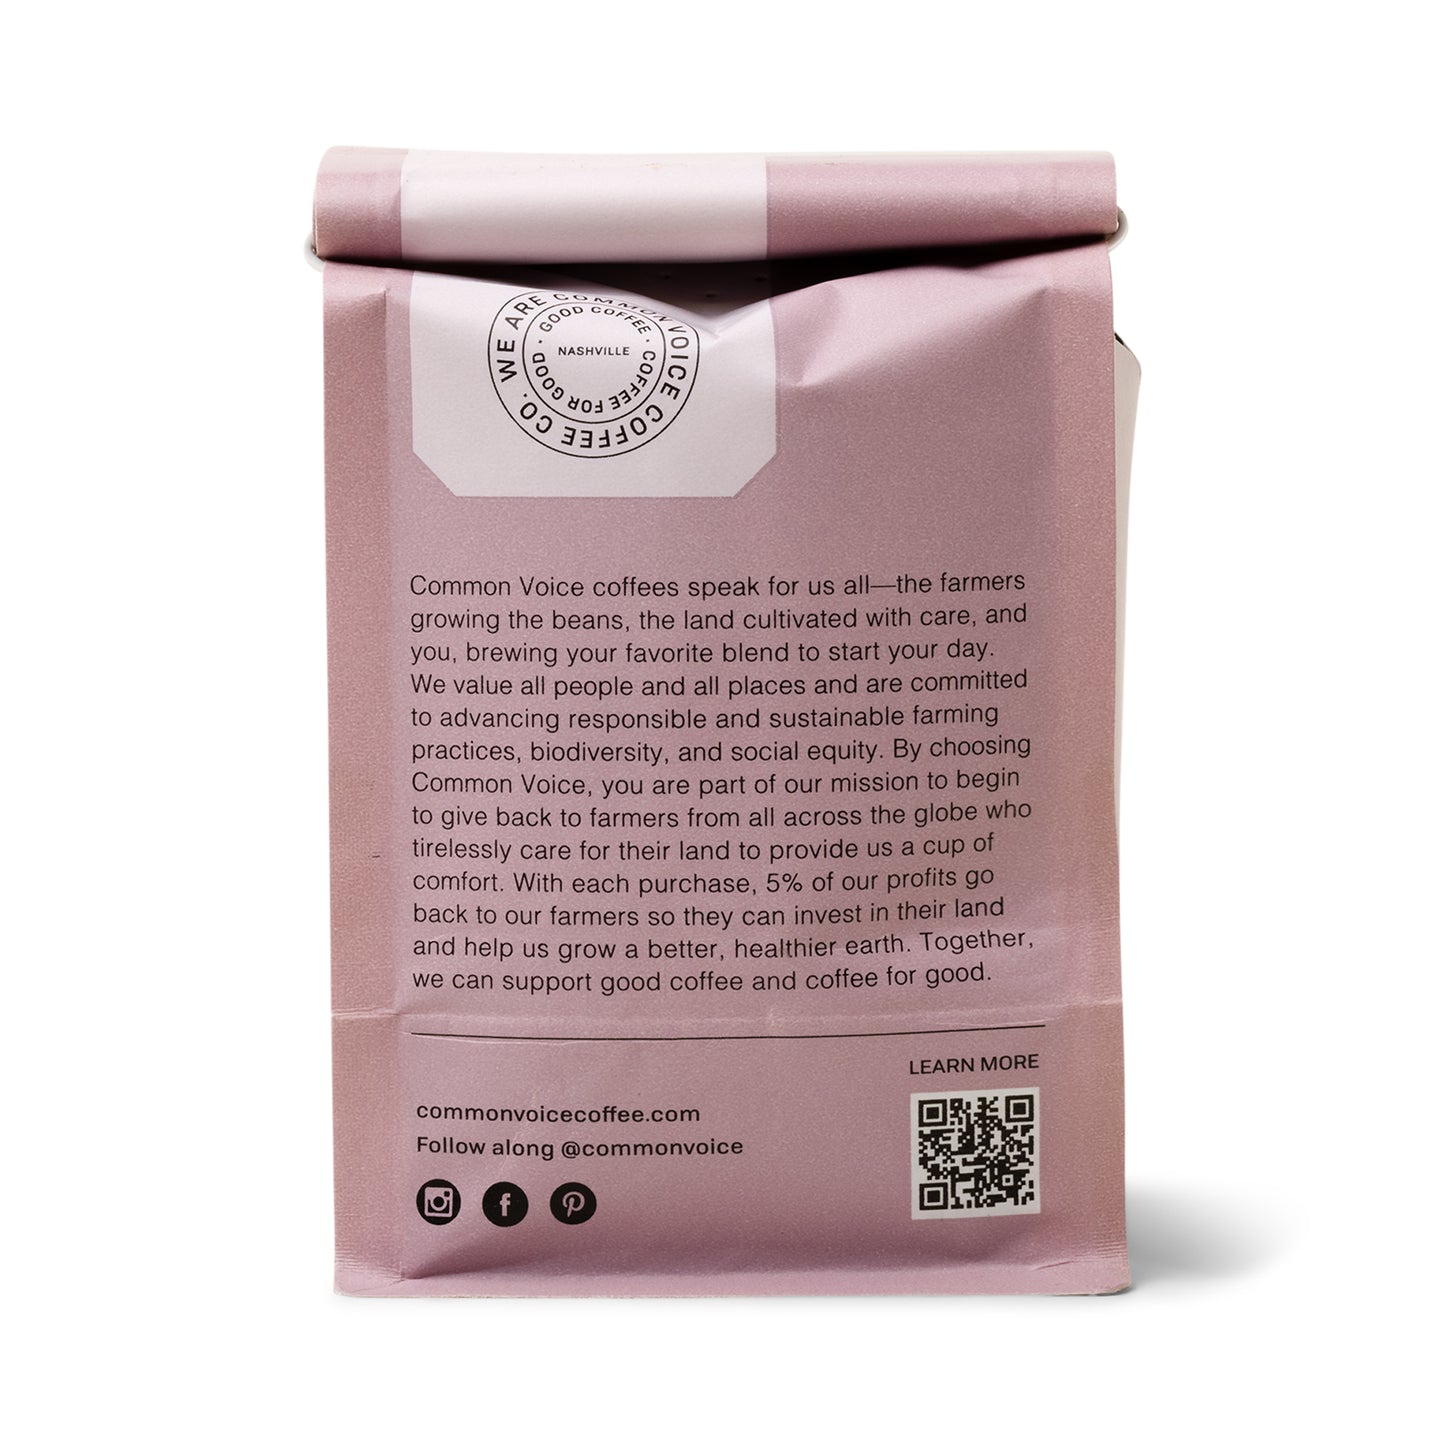 Perennial Common Voice Coffee bag in a pink color - Back of bag